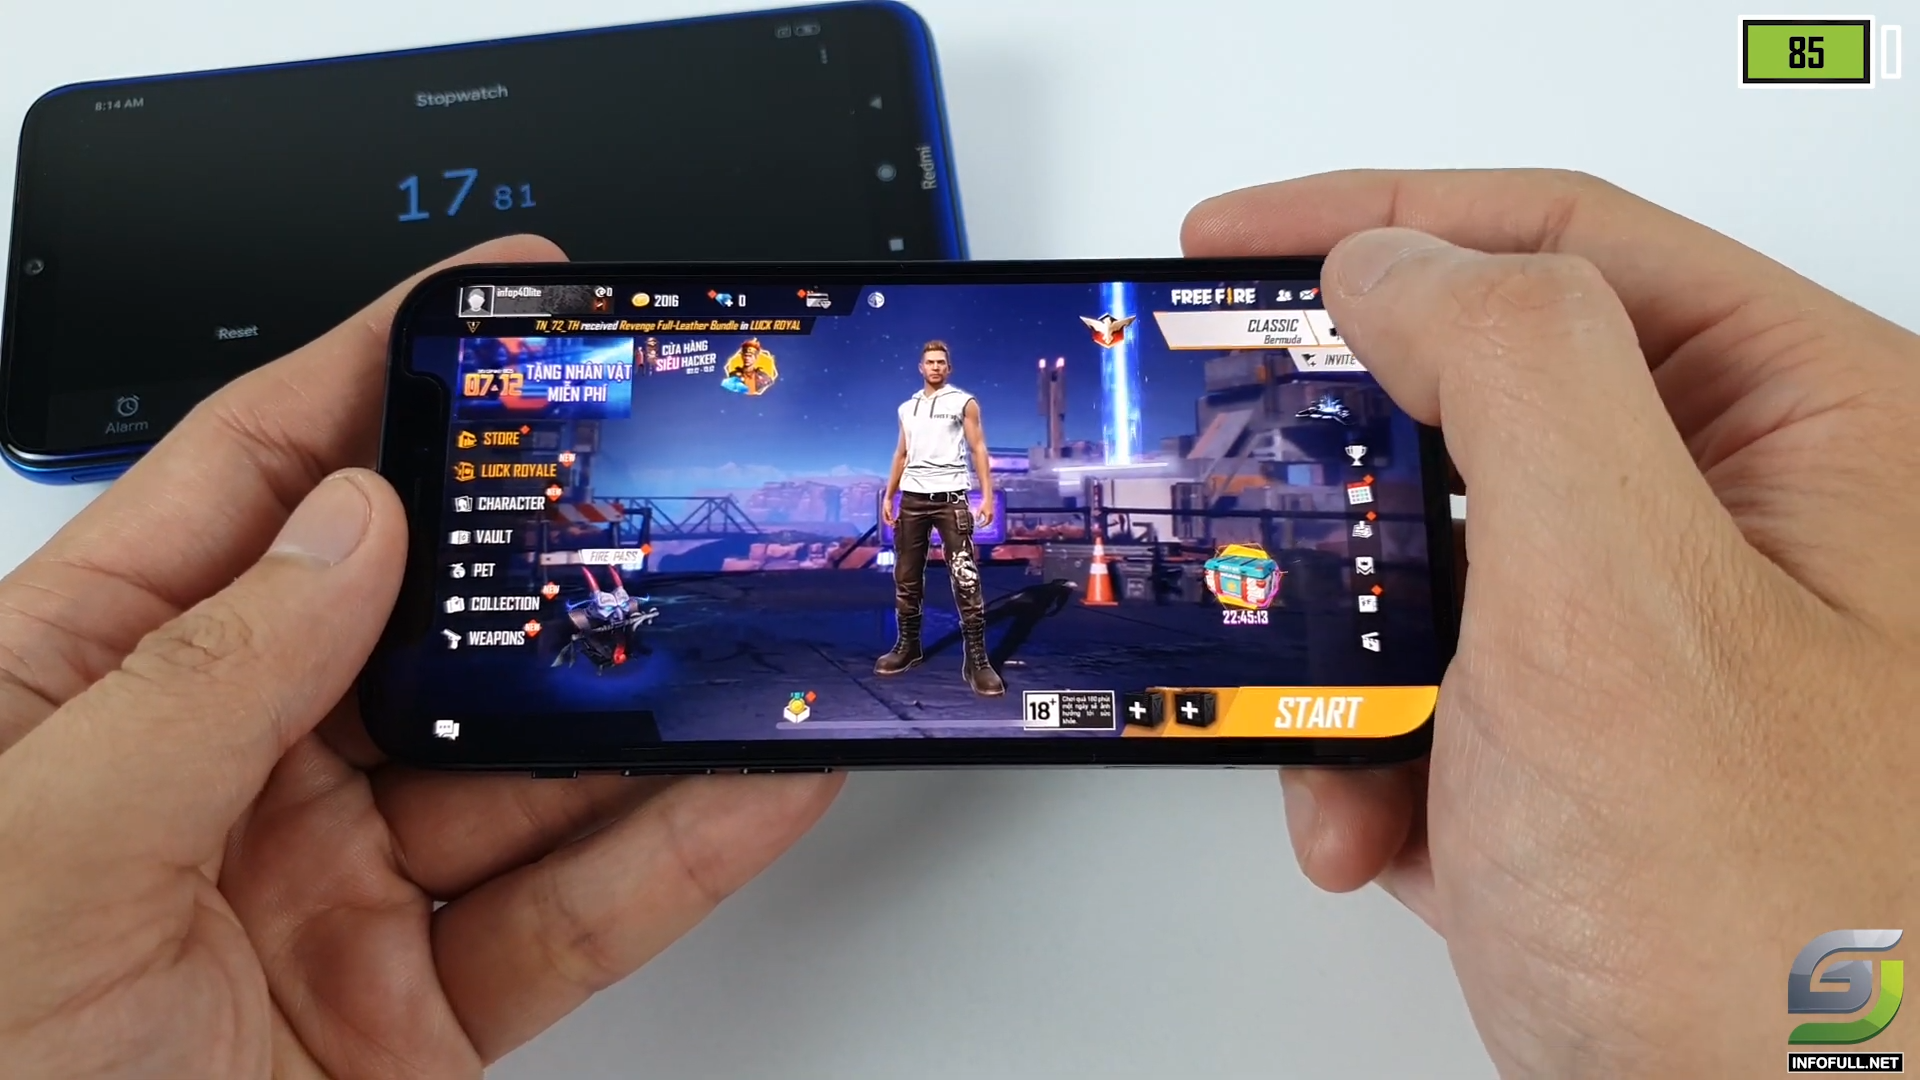 How To Download Free Fire In iPhone 